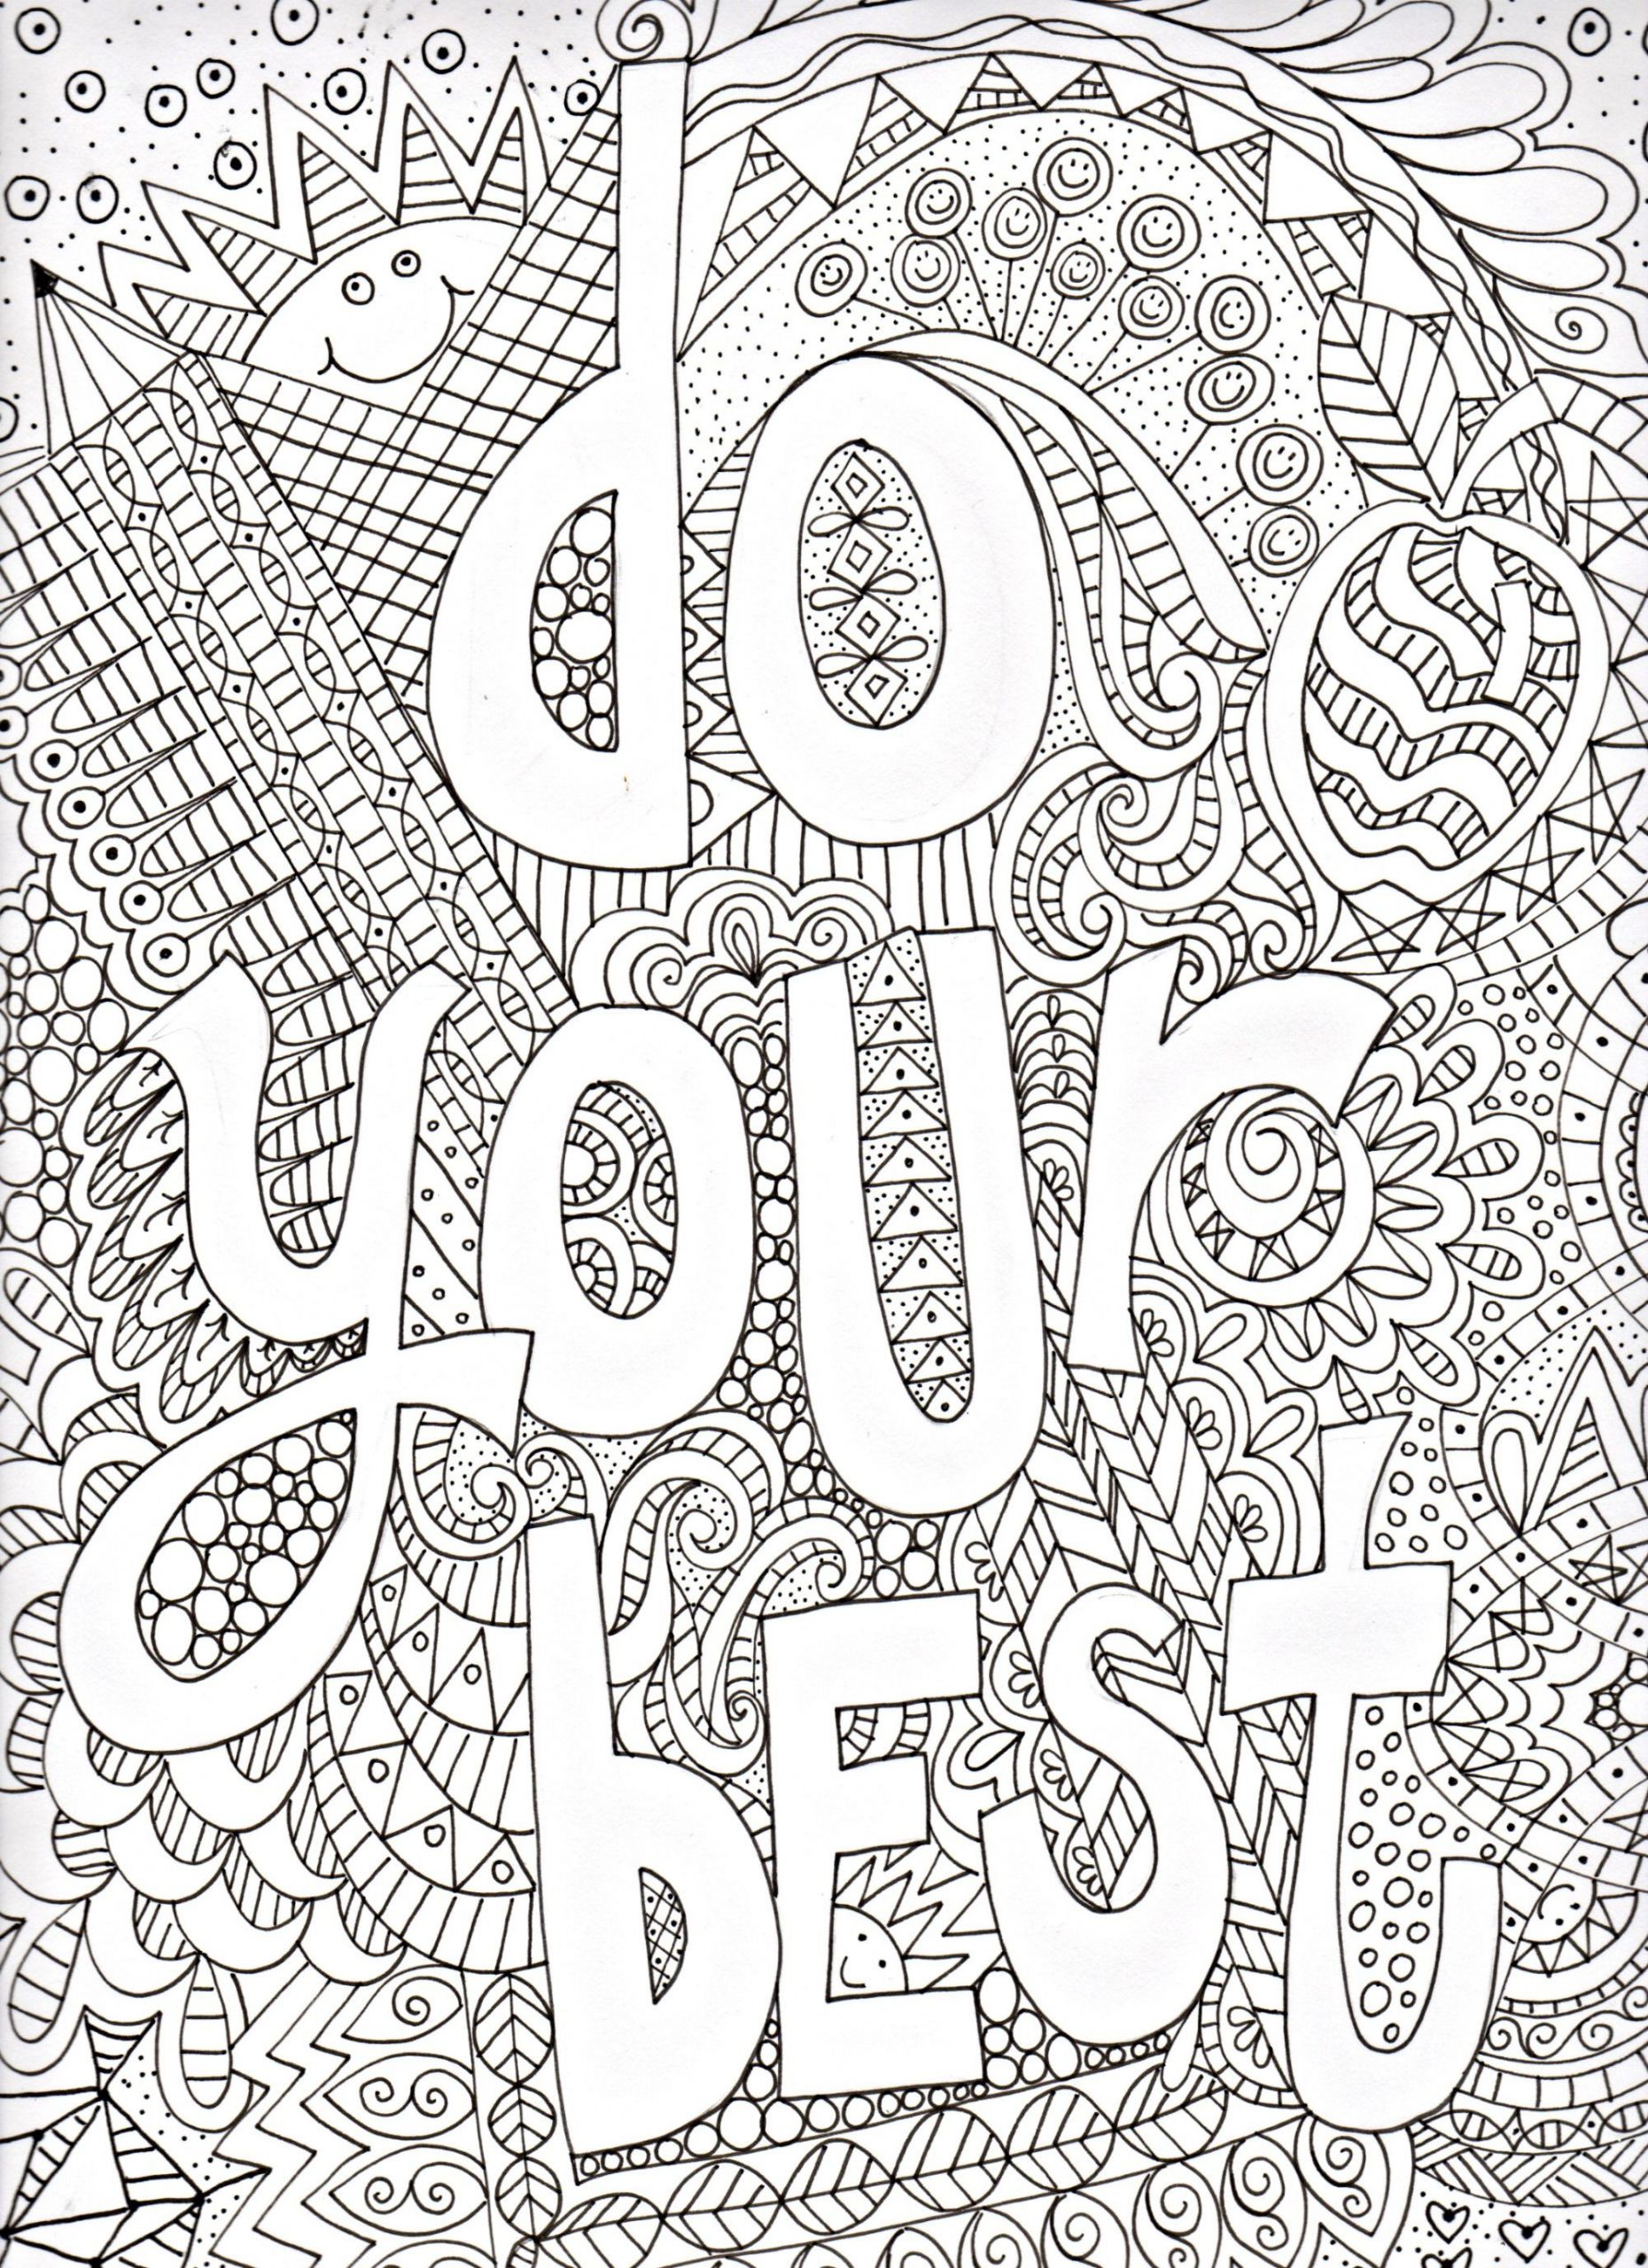 Inspirational Coloring Pages For Kids
 Get out those colored pencils and have some doodle fun